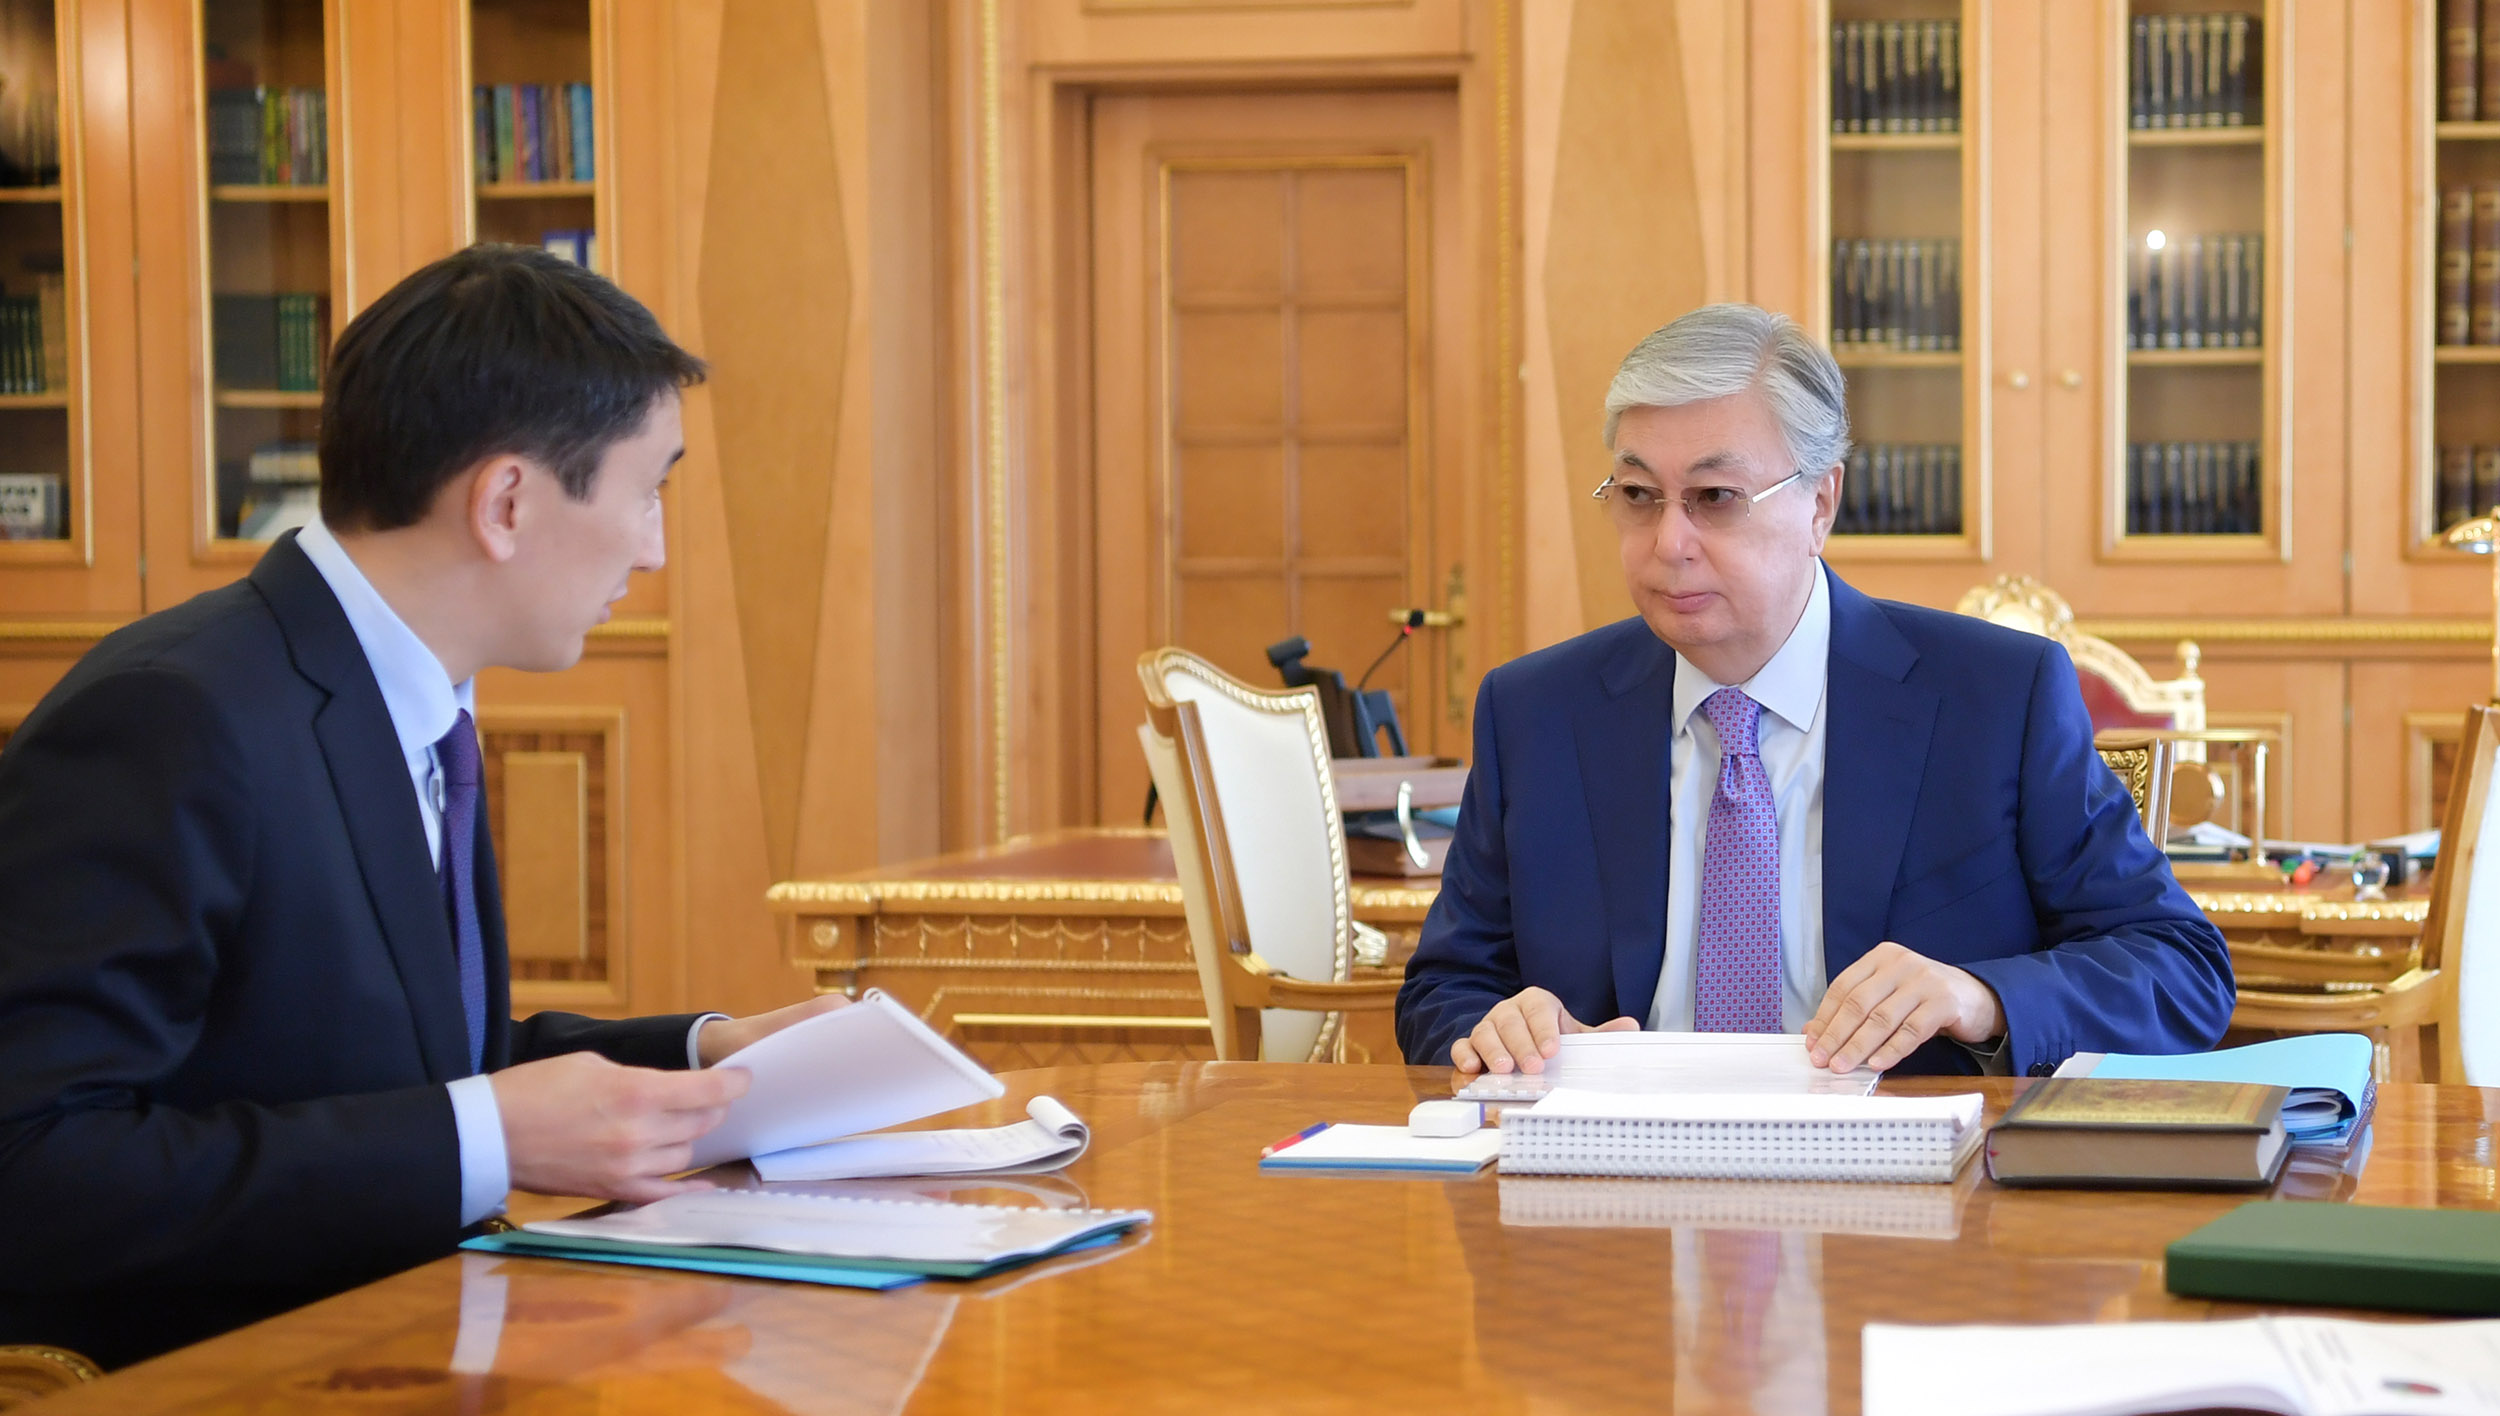 Kassym-Jomart Tokayev receives Magzum Mirzagaliev, Minister of Ecology, Geology and Natural Resources